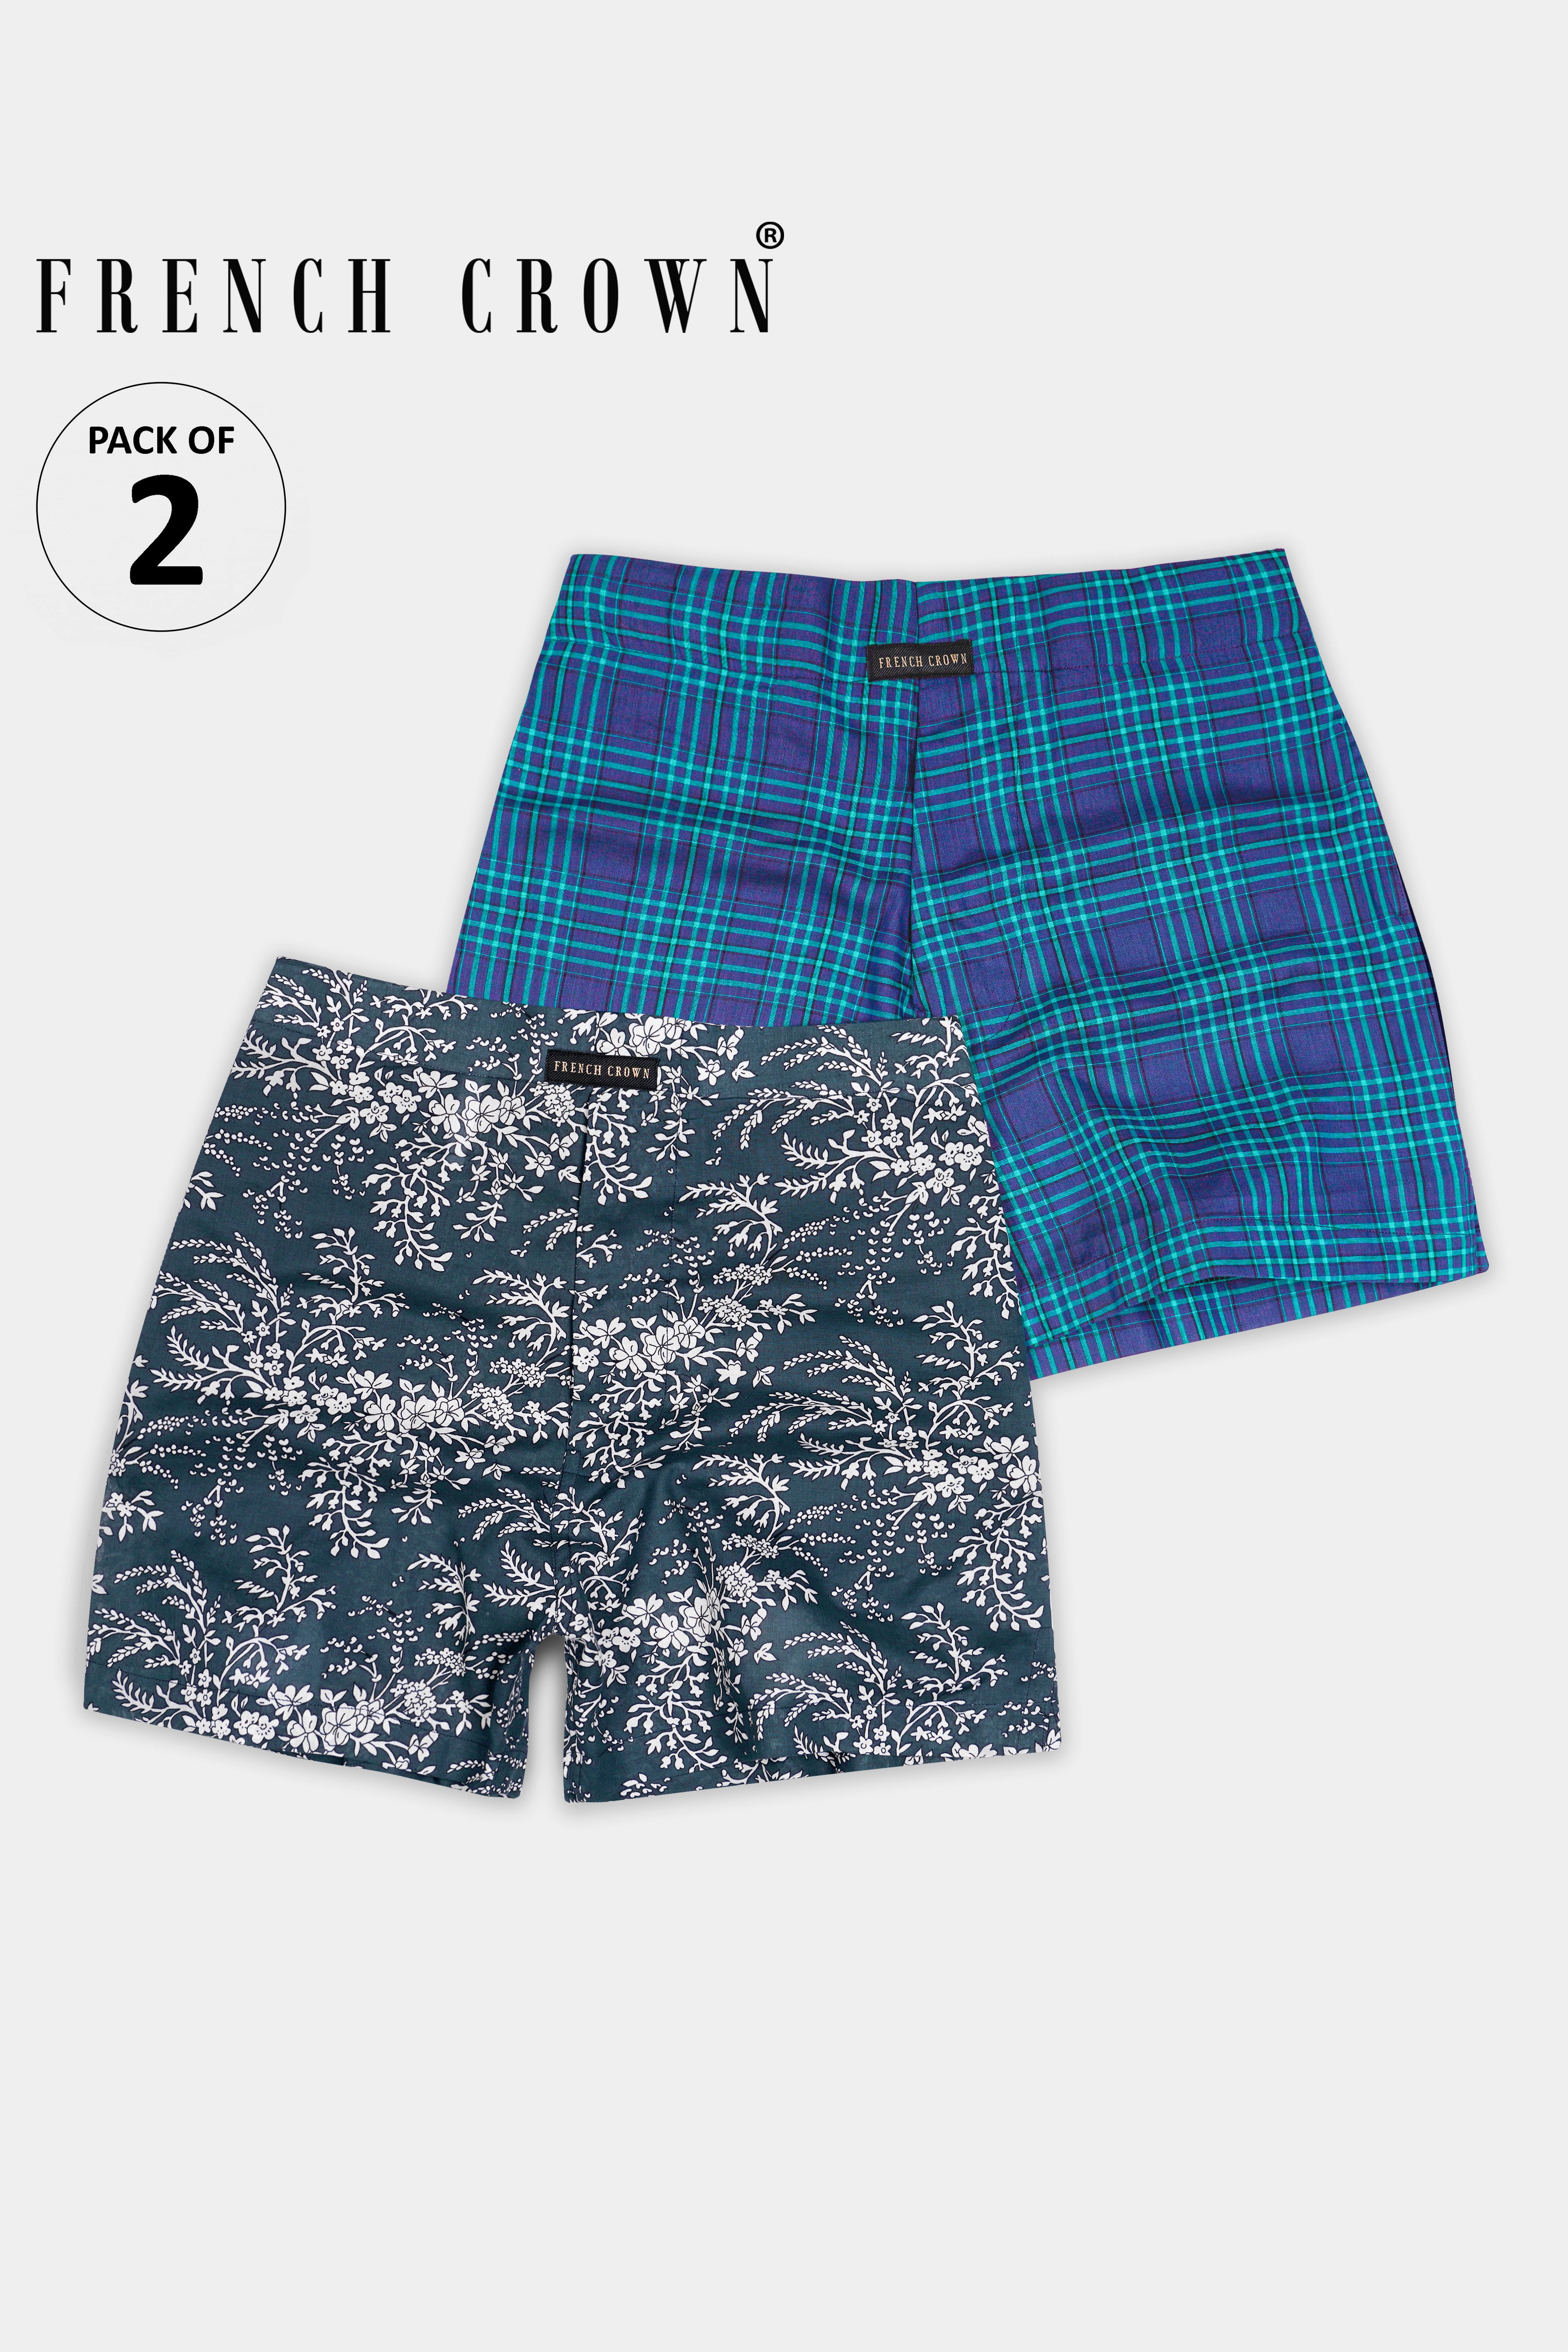 Meteorite Blue with Surfie Green Plaid and Limed Spruce Blue Ditsy Printed Premium Cotton Boxers BX525-BX534-28, BX525-BX534-30, BX525-BX534-32, BX525-BX534-34, BX525-BX534-36, BX525-BX534-38, BX525-BX534-40, BX525-BX534-42, BX525-BX534-44